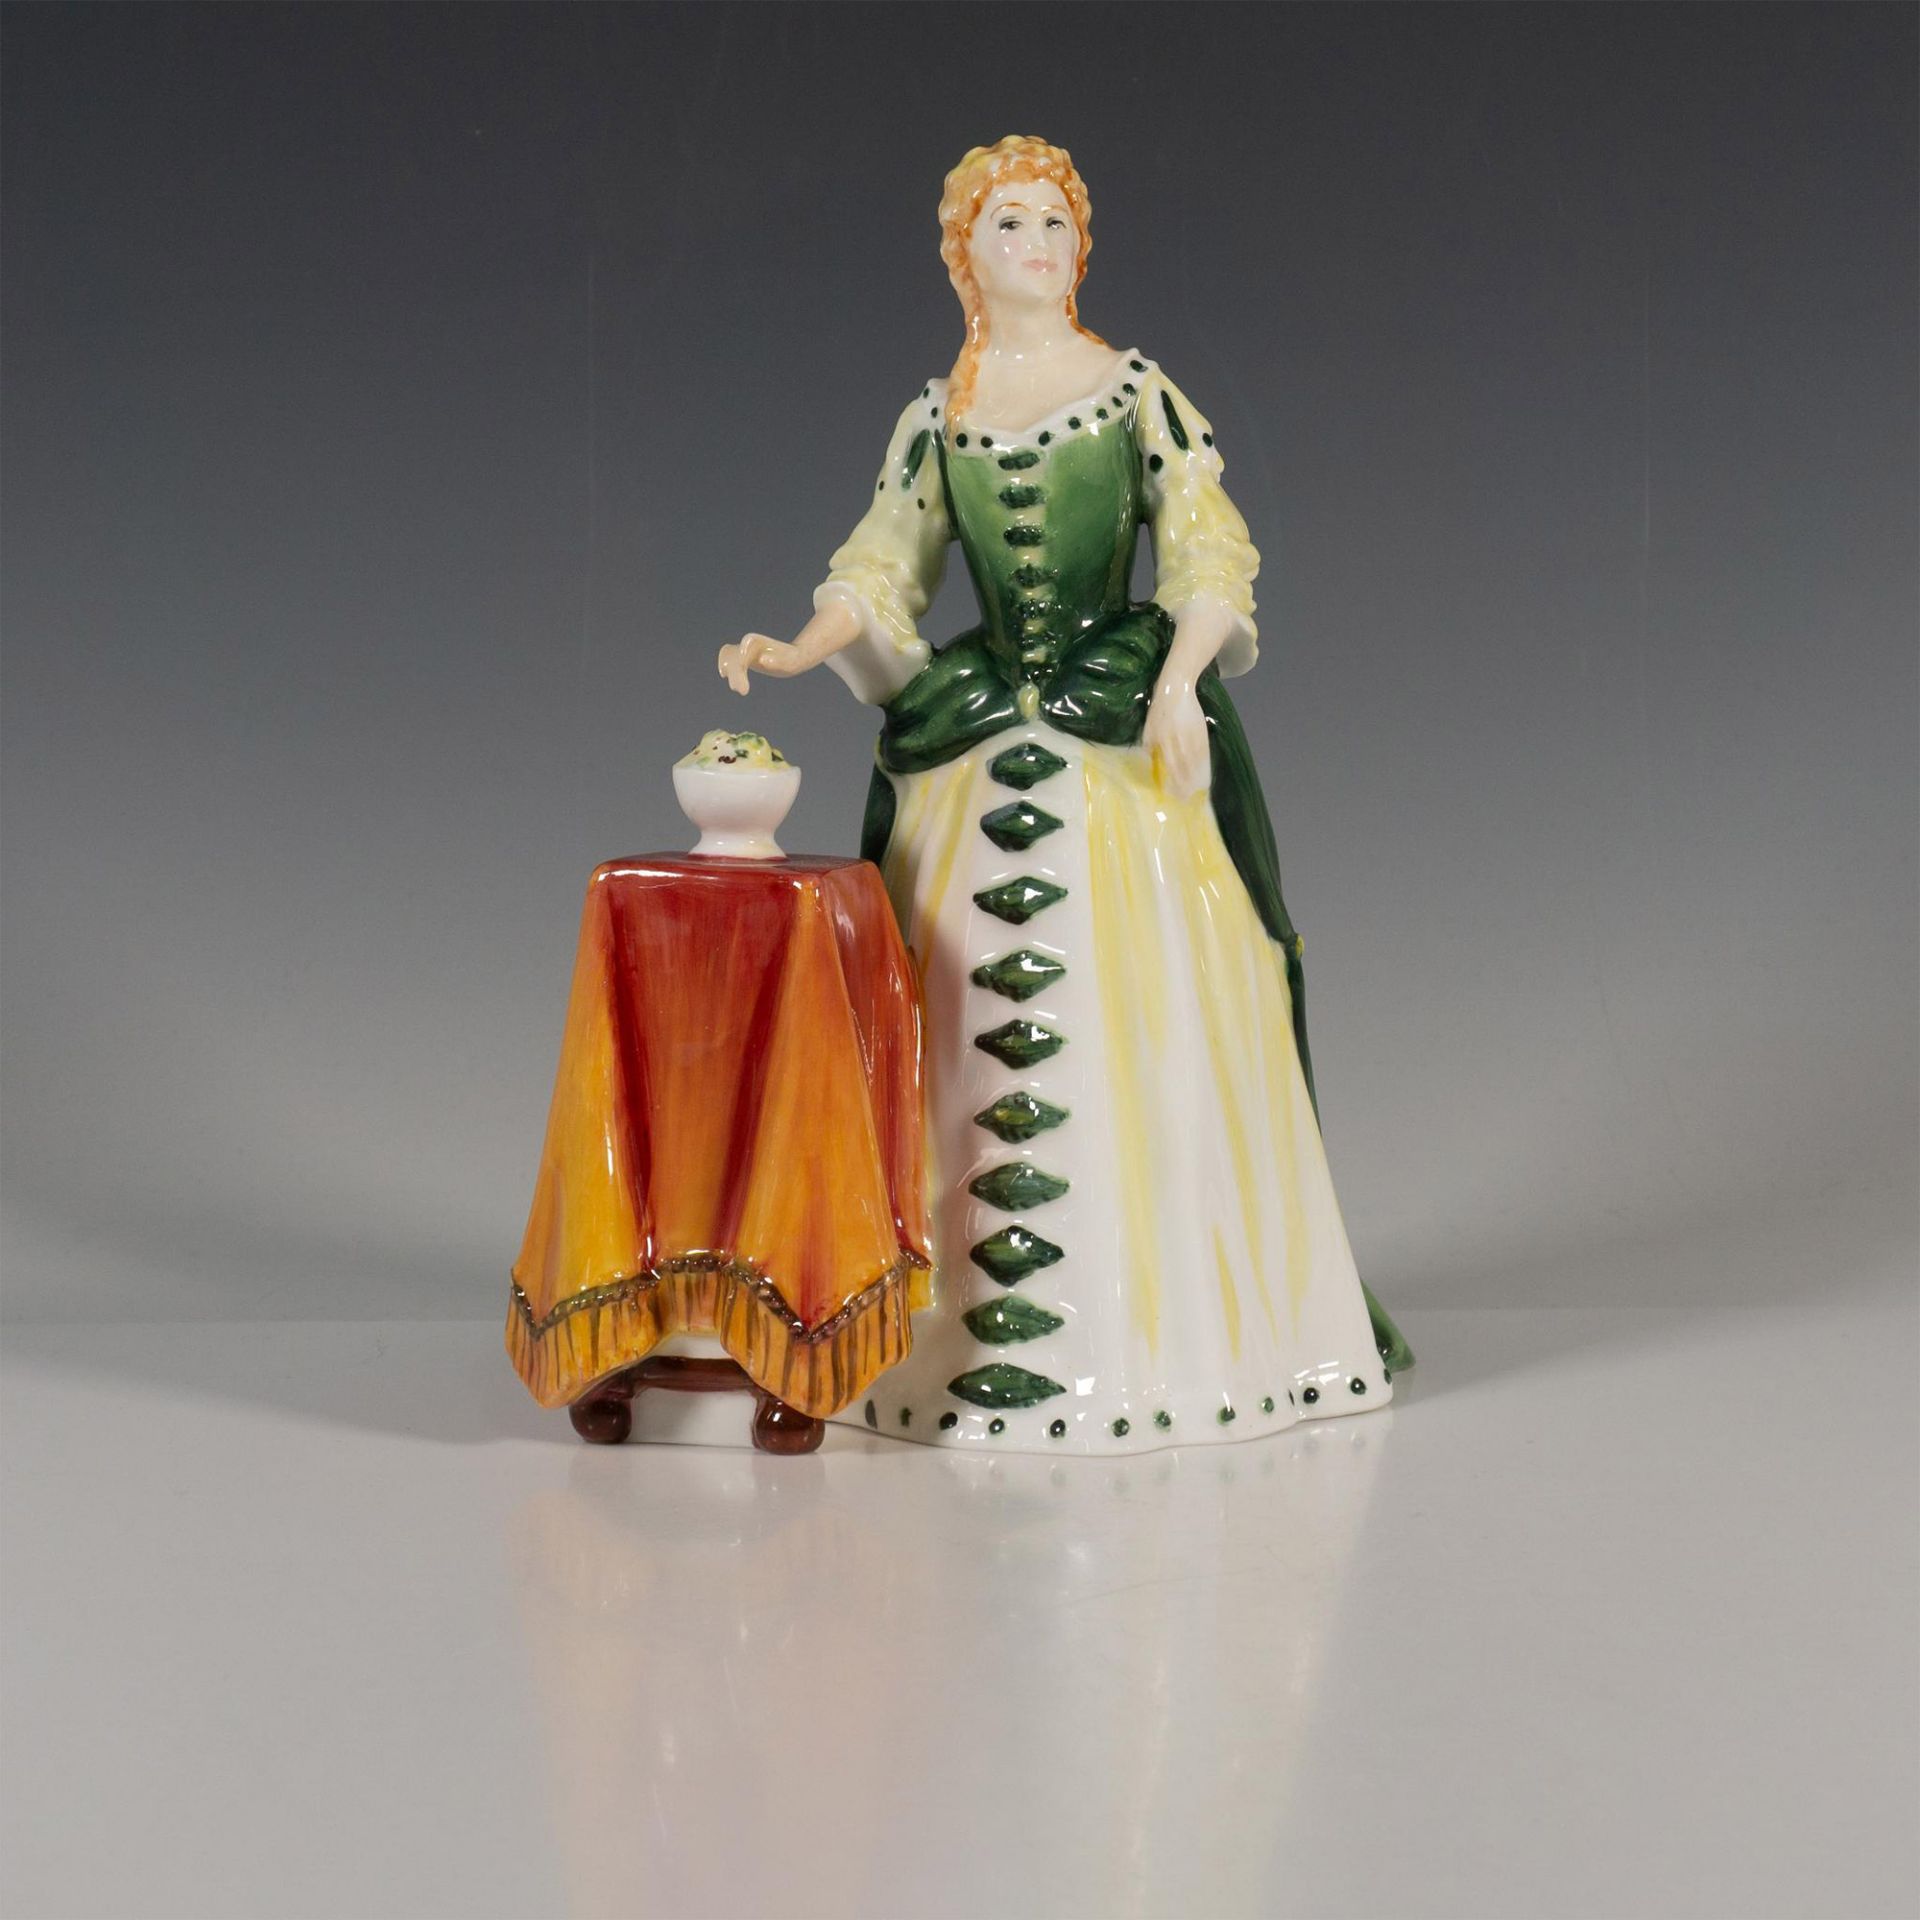 Queen Mary II HN4474 Prototype - Royal Doulton Figurine - Image 2 of 5